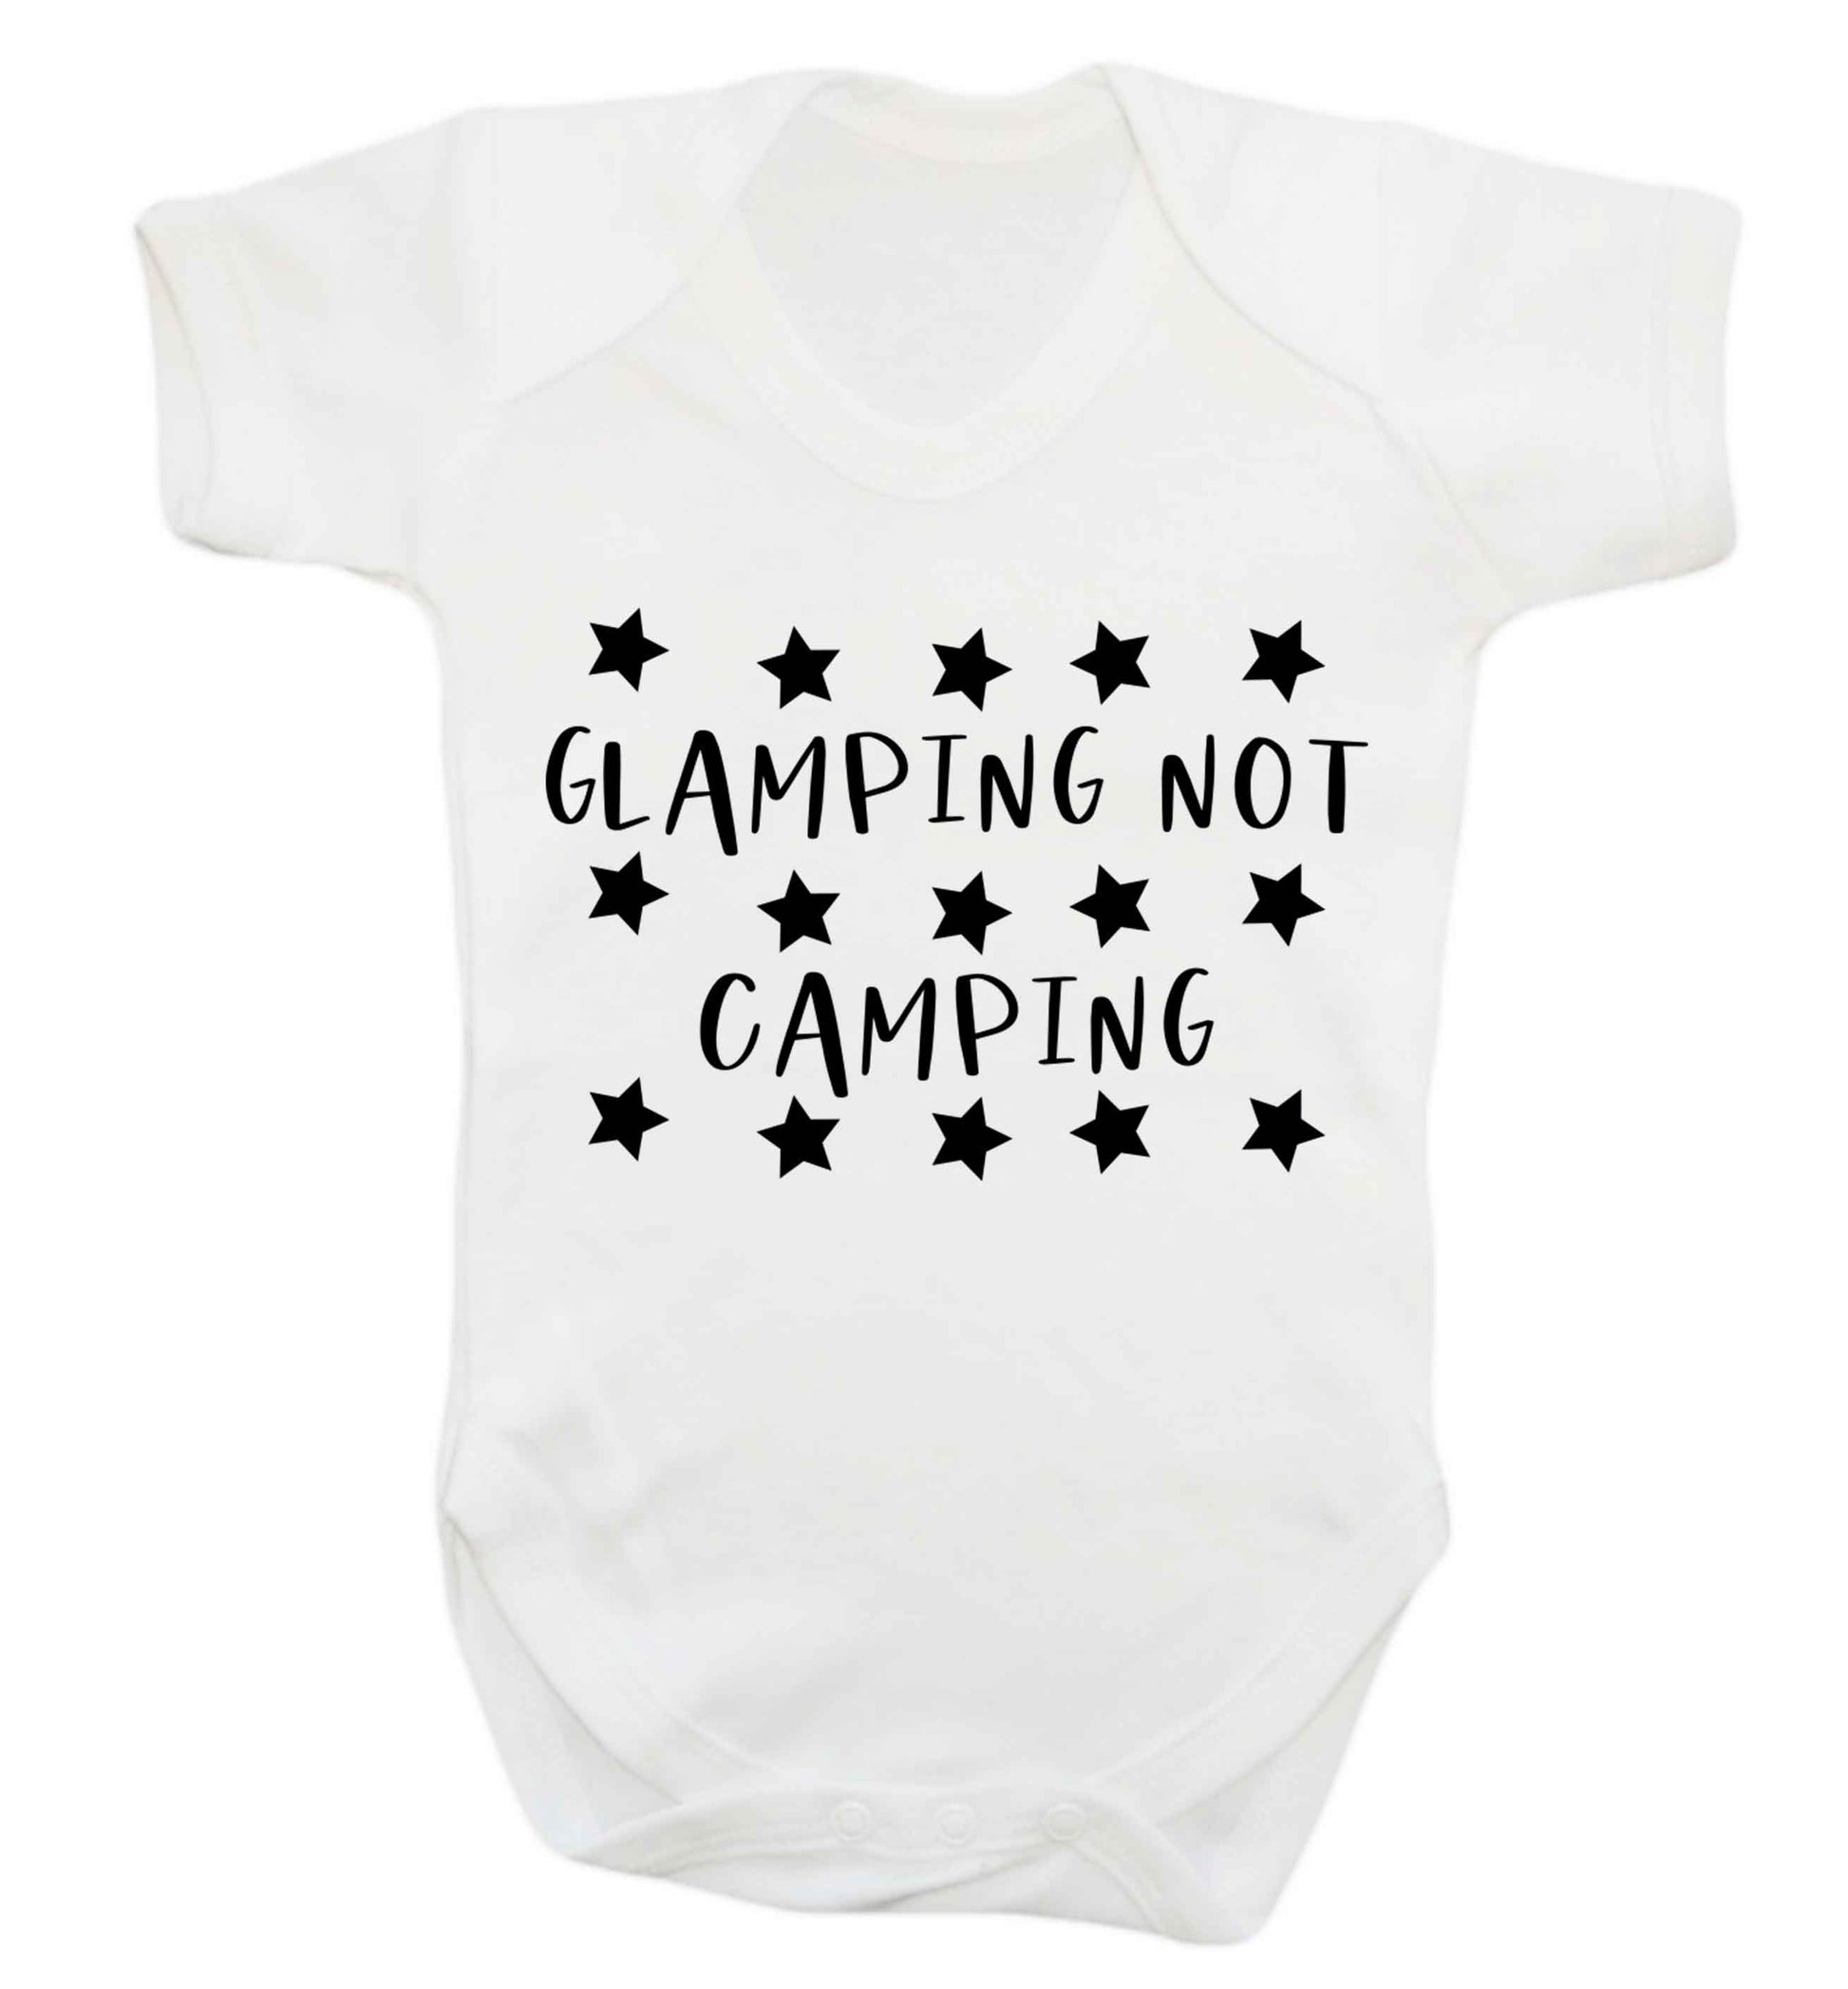 Glamping not camping Baby Vest white 18-24 months